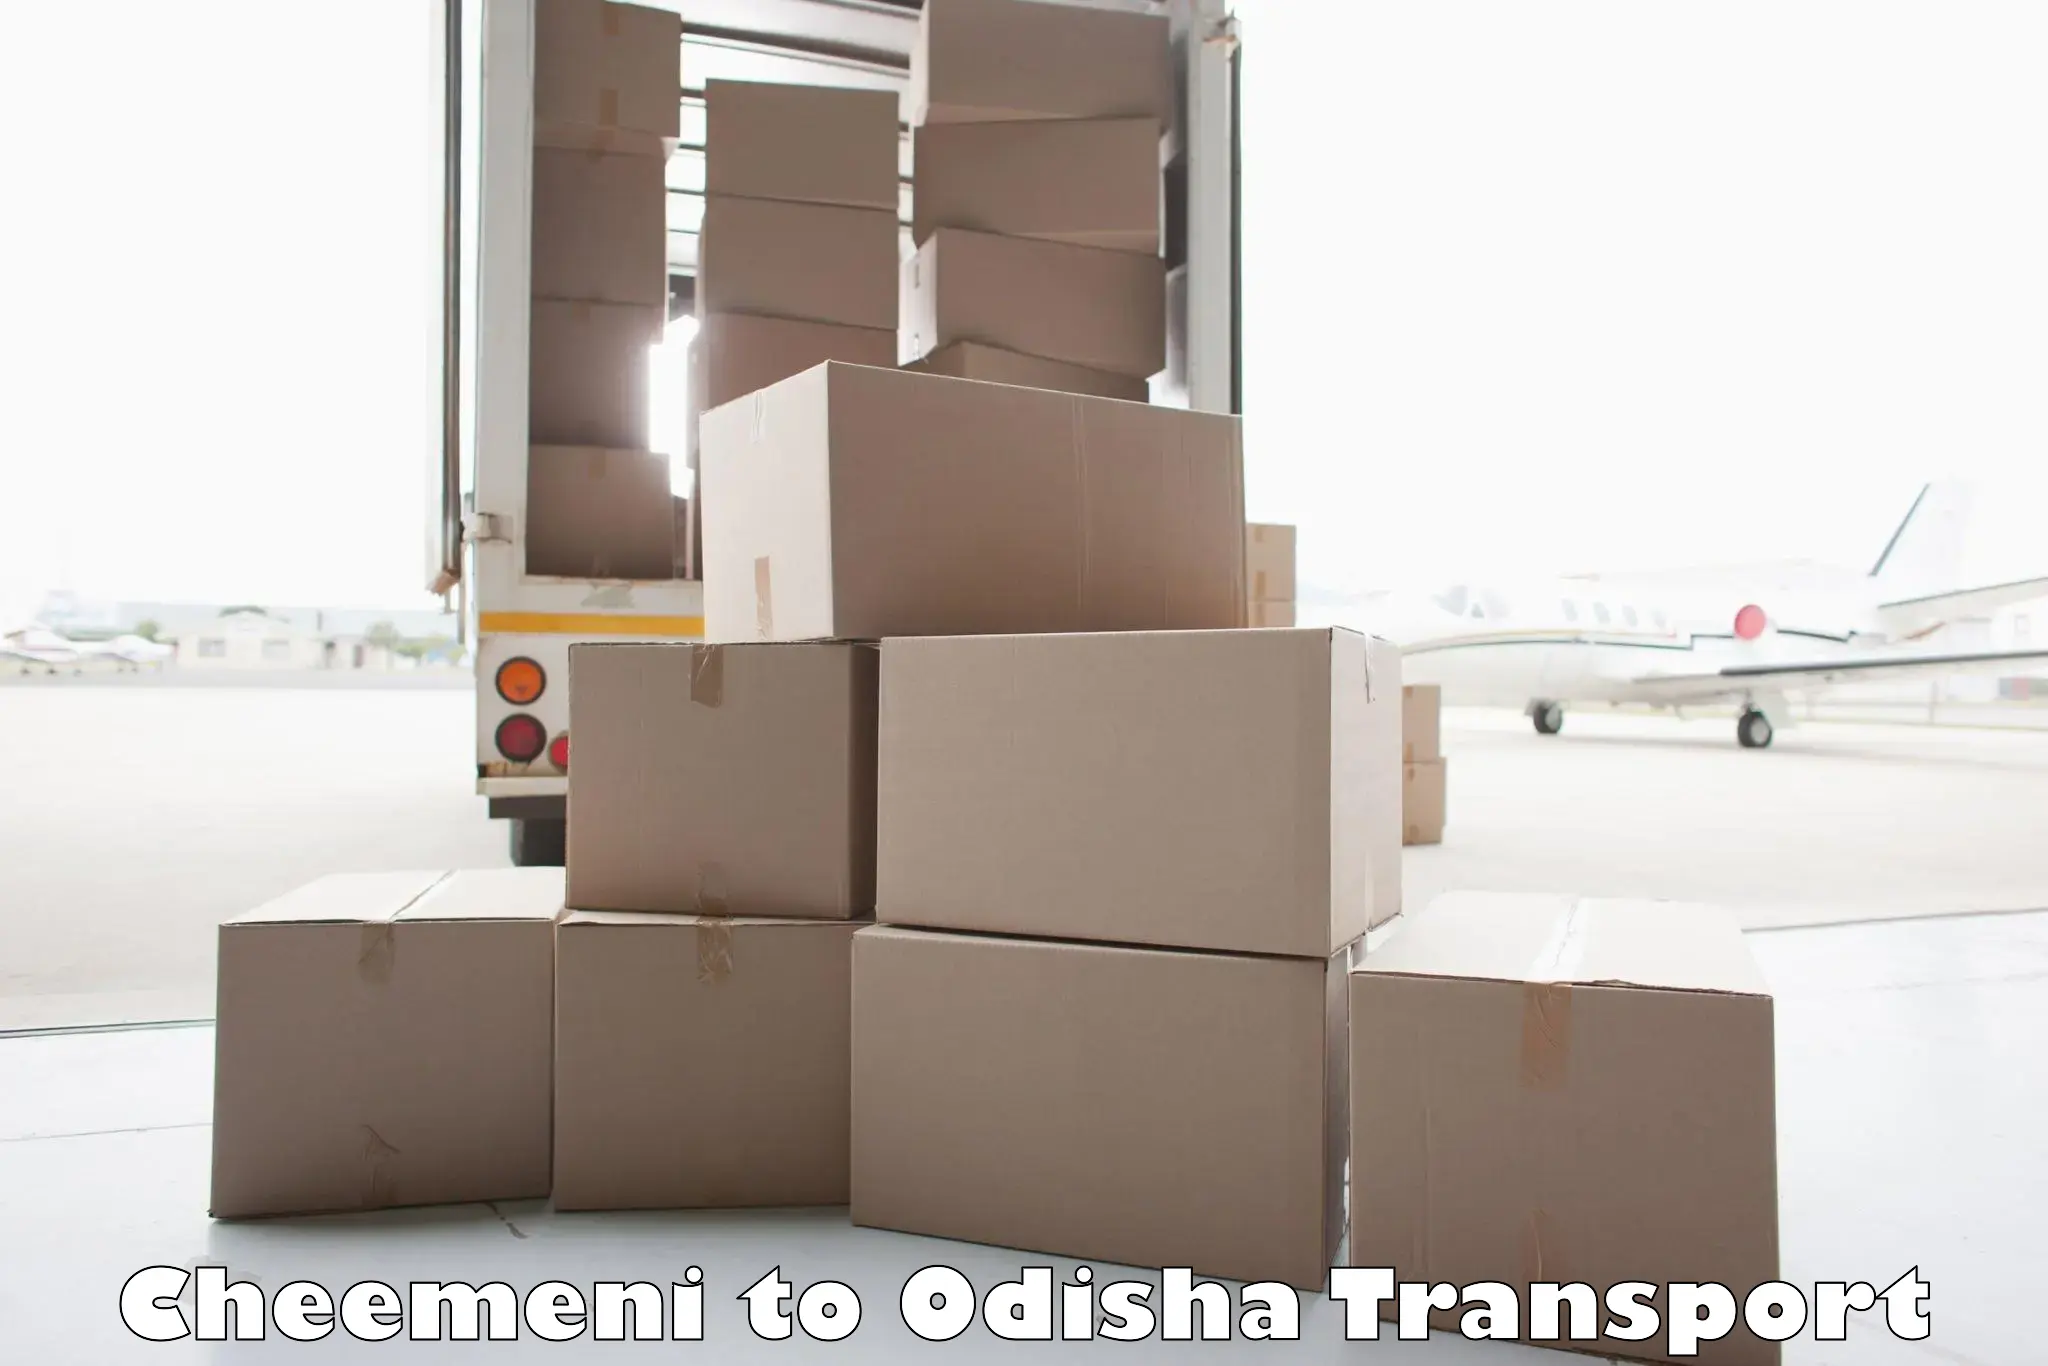 Transport bike from one state to another Cheemeni to Odisha